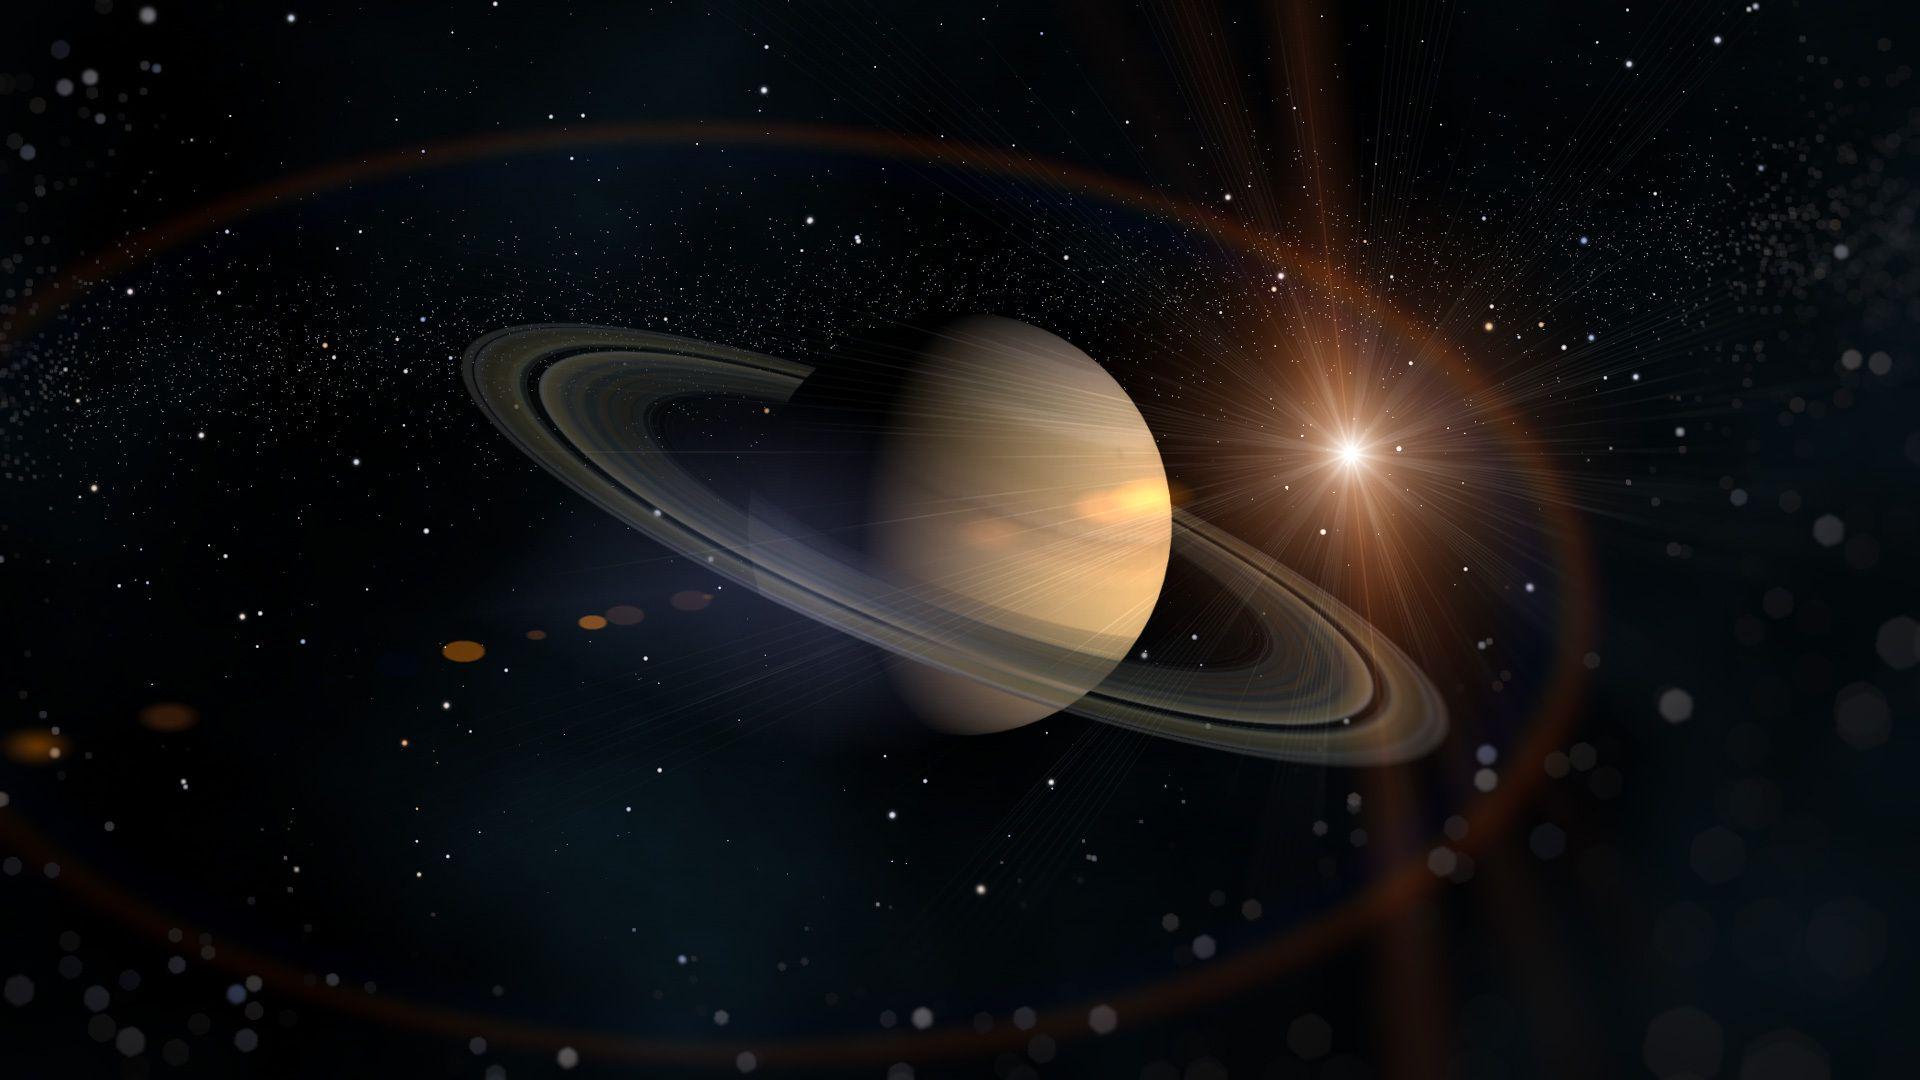 Saturn Planet Wallpapers Top Free Saturn Planet Backgrounds Wallpaperaccess 2166